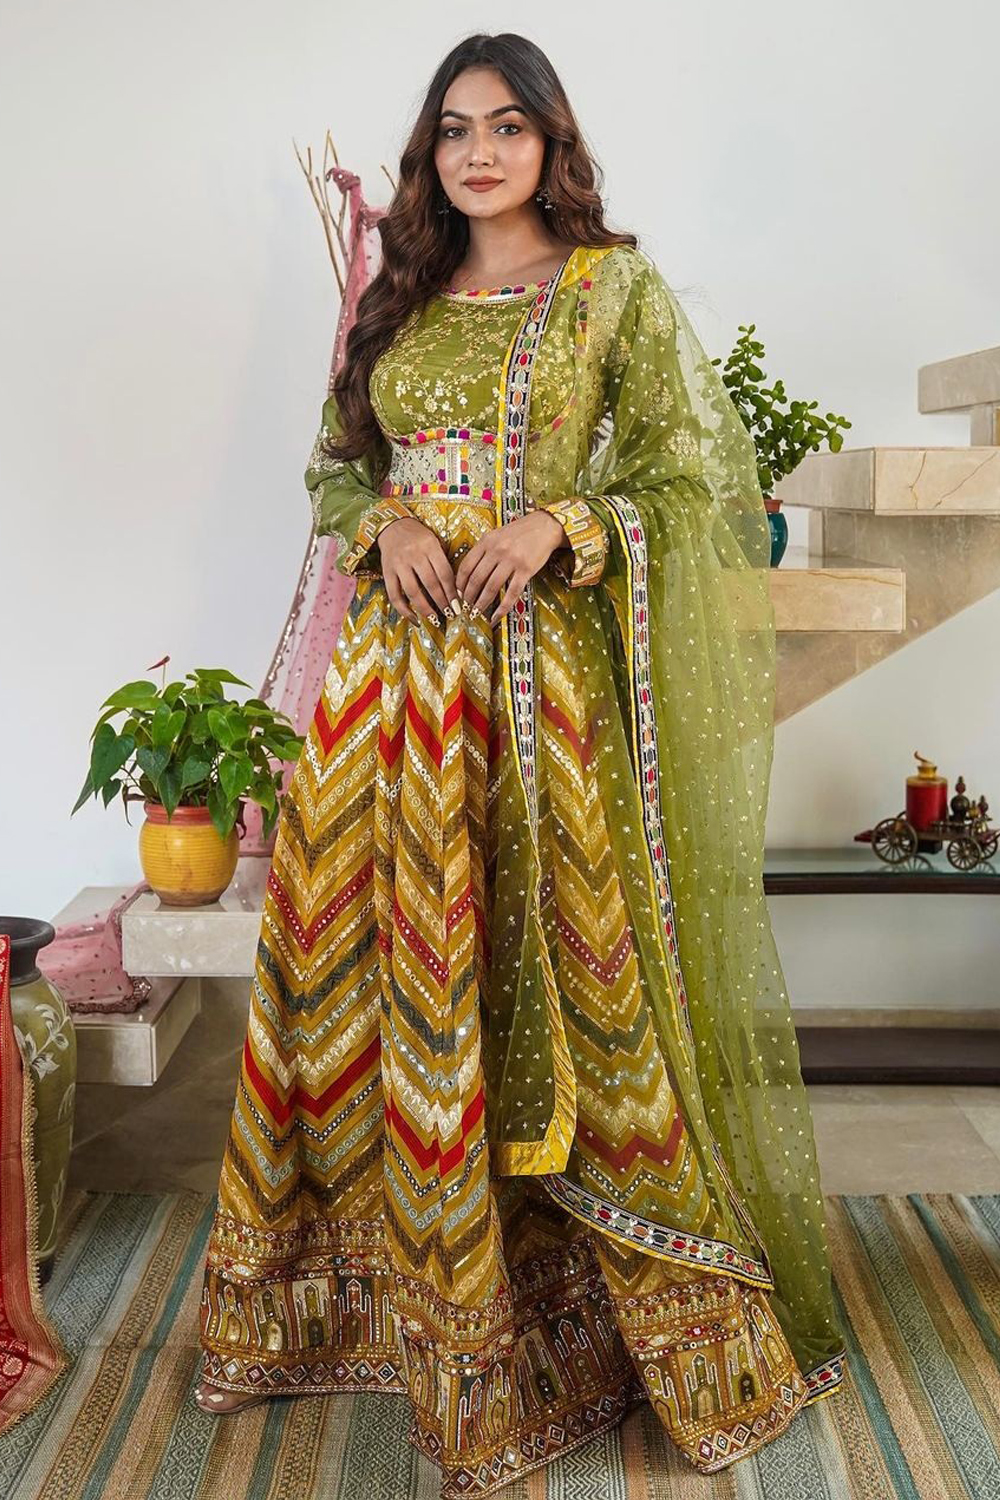 Wedding Salwar Kameez - Dazzling Outfits for Your Big Day - Seasons India